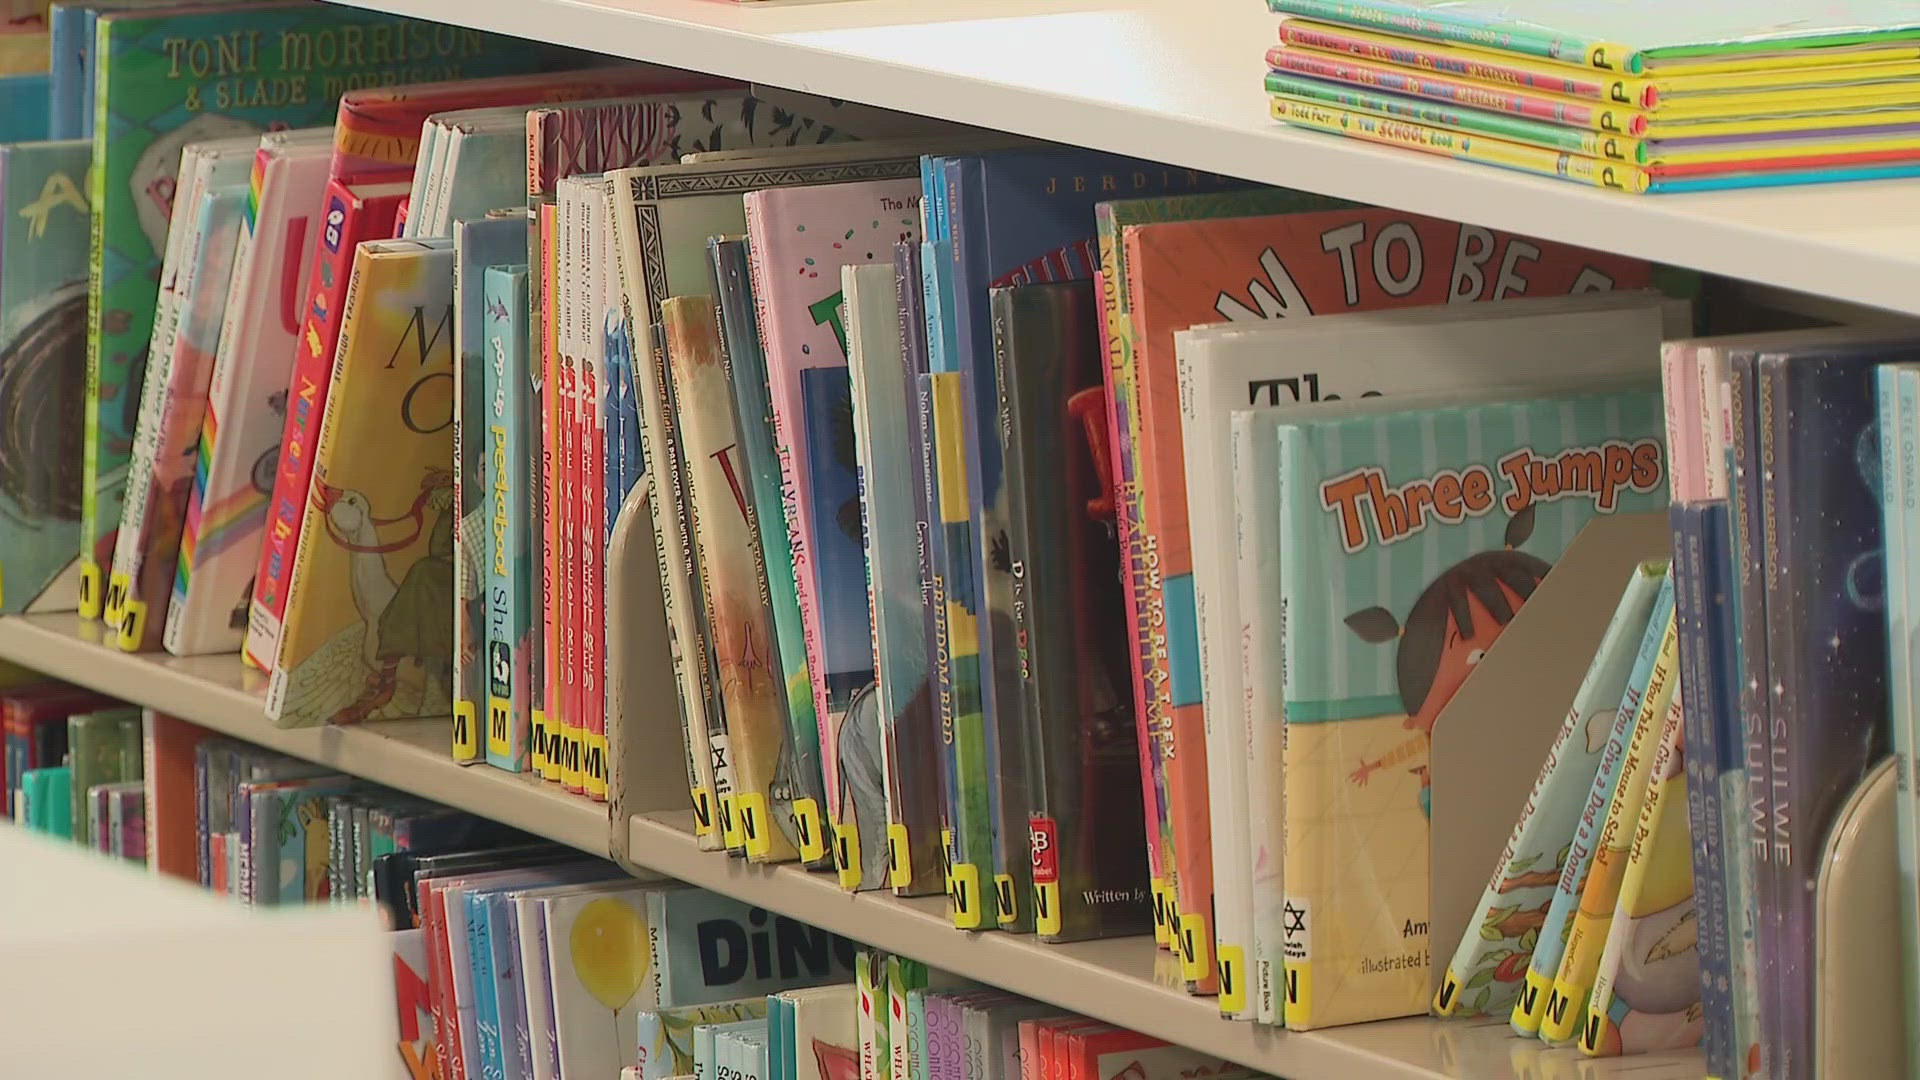 The program focuses on keeping reading skills strong through the summer.